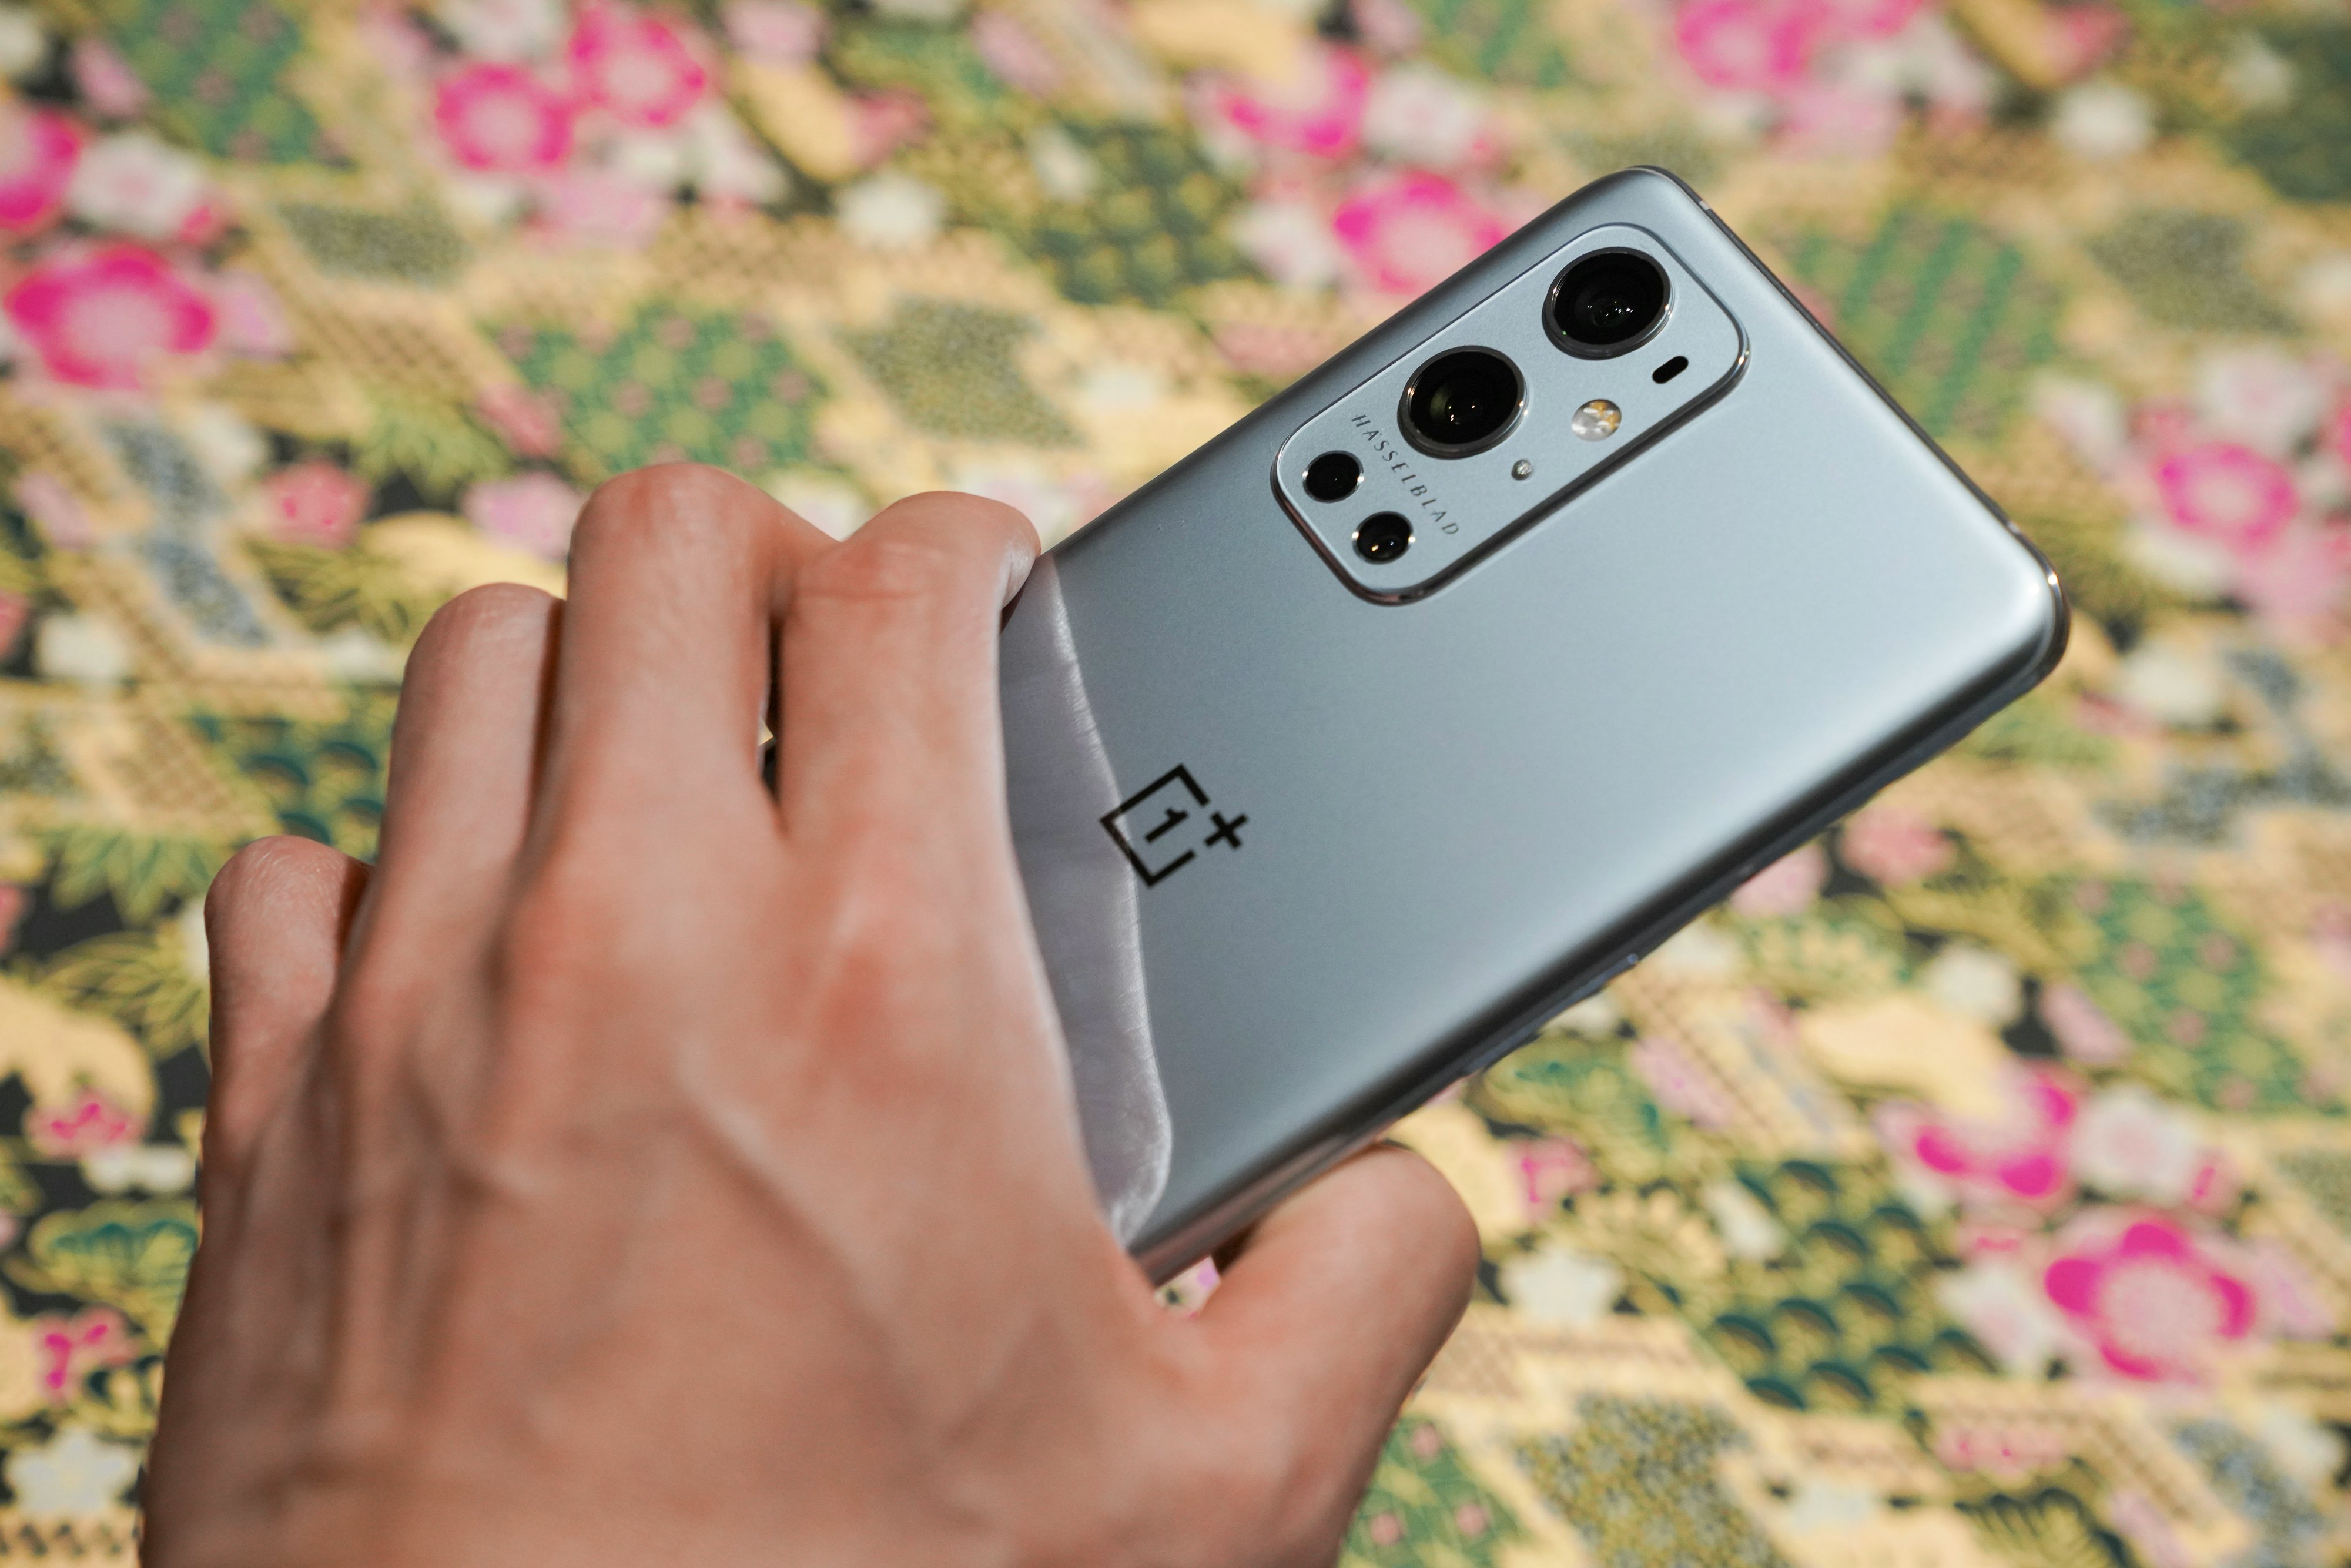 OnePlus 9 review: a great alternative Android phone